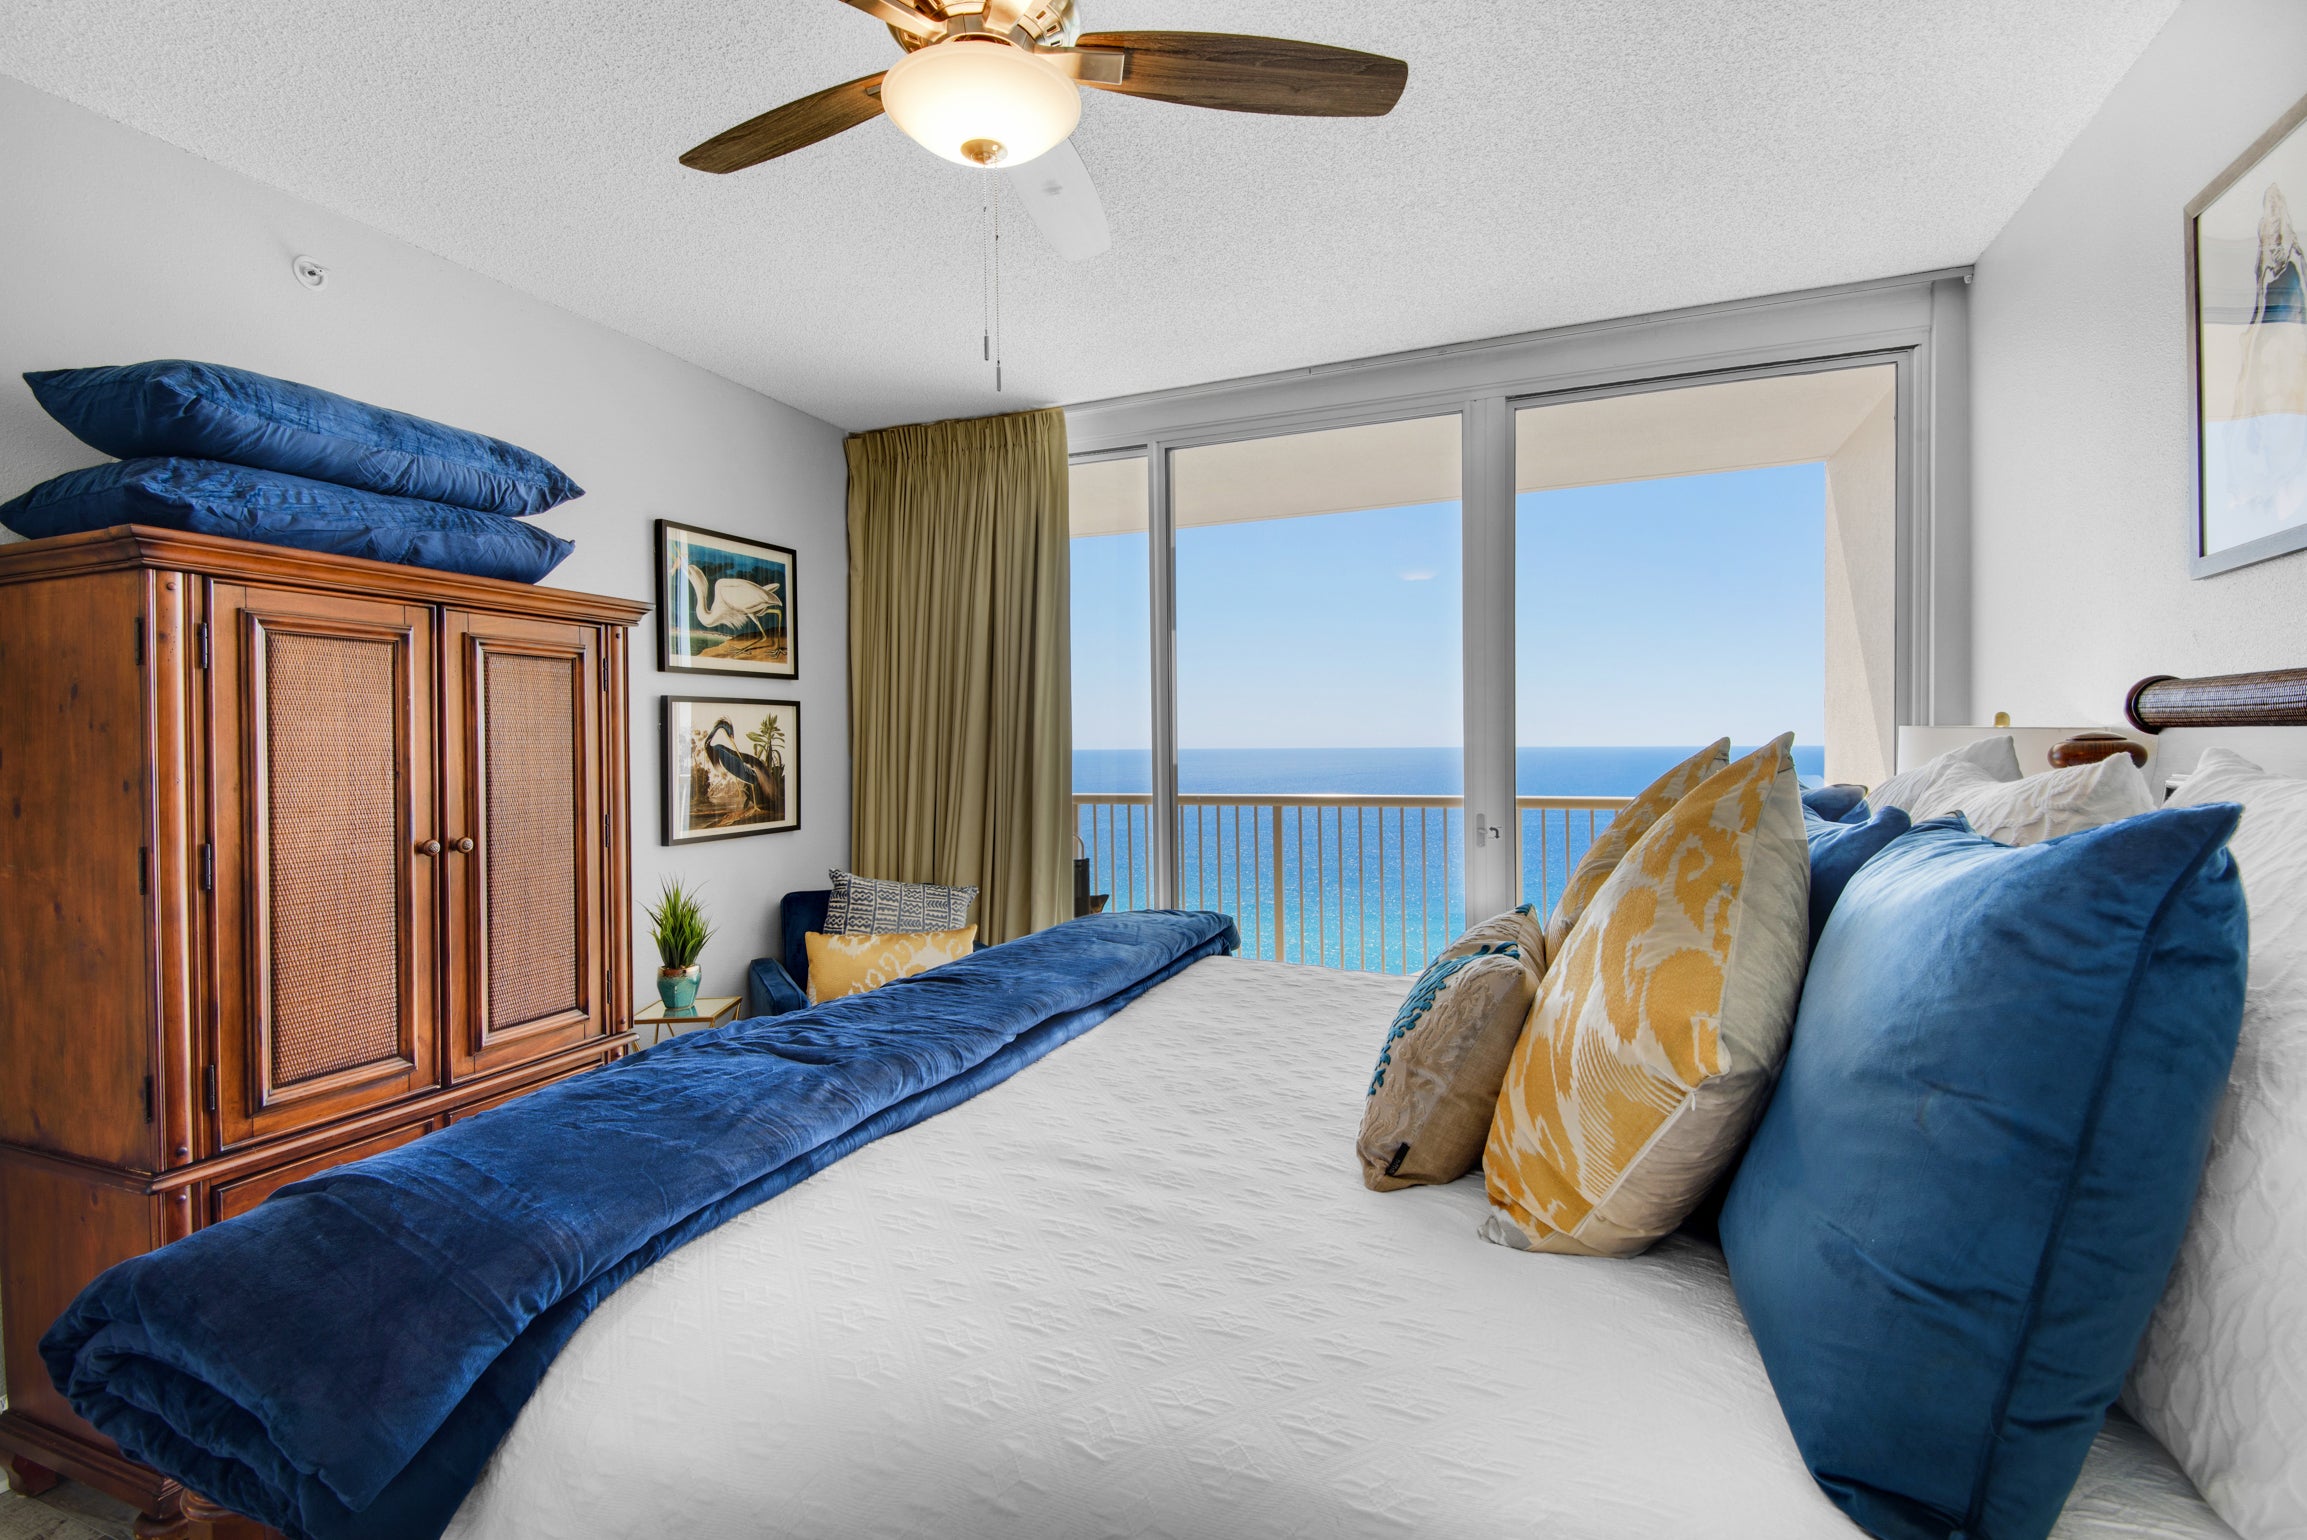 Master bedroom with a great view